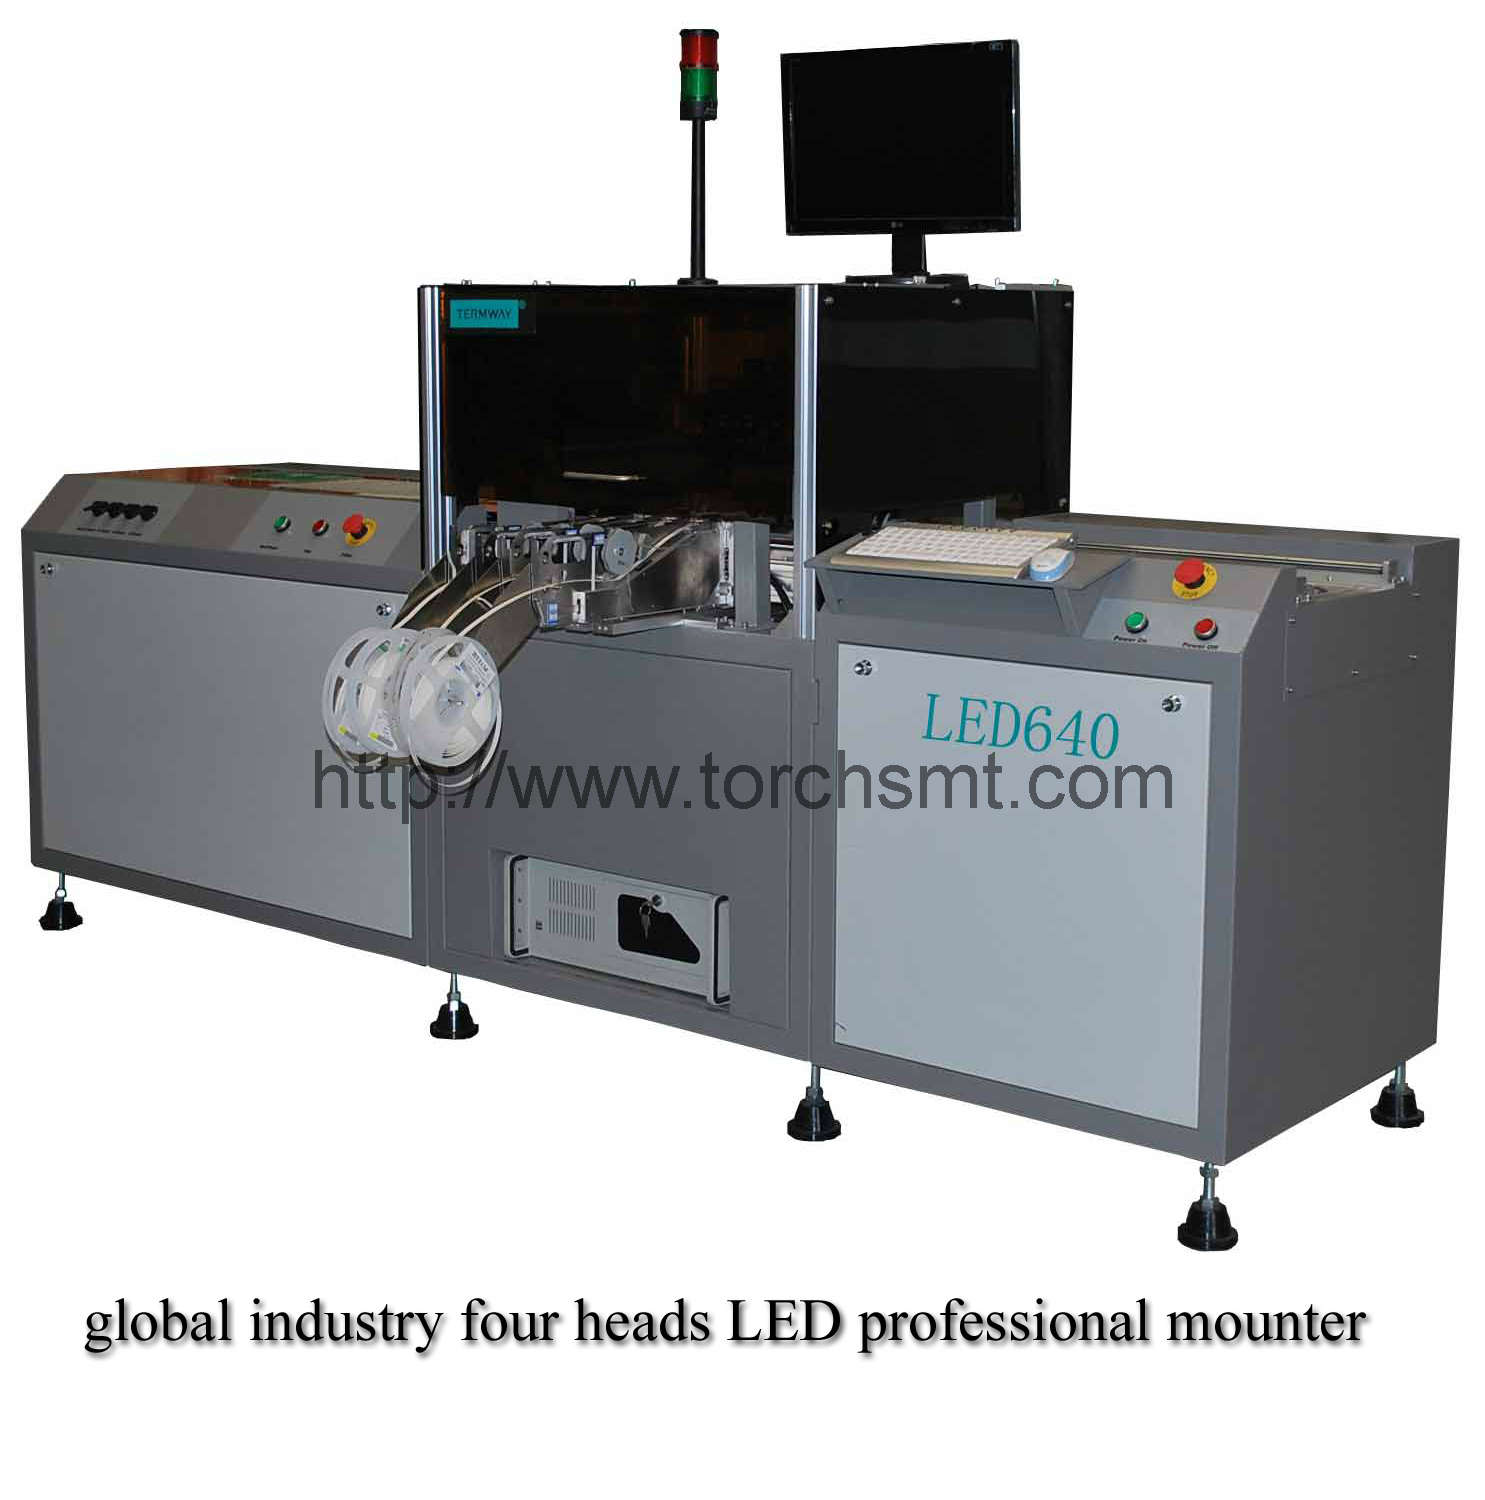 LED-automatisches Chip Mounter Baumuster: LED640